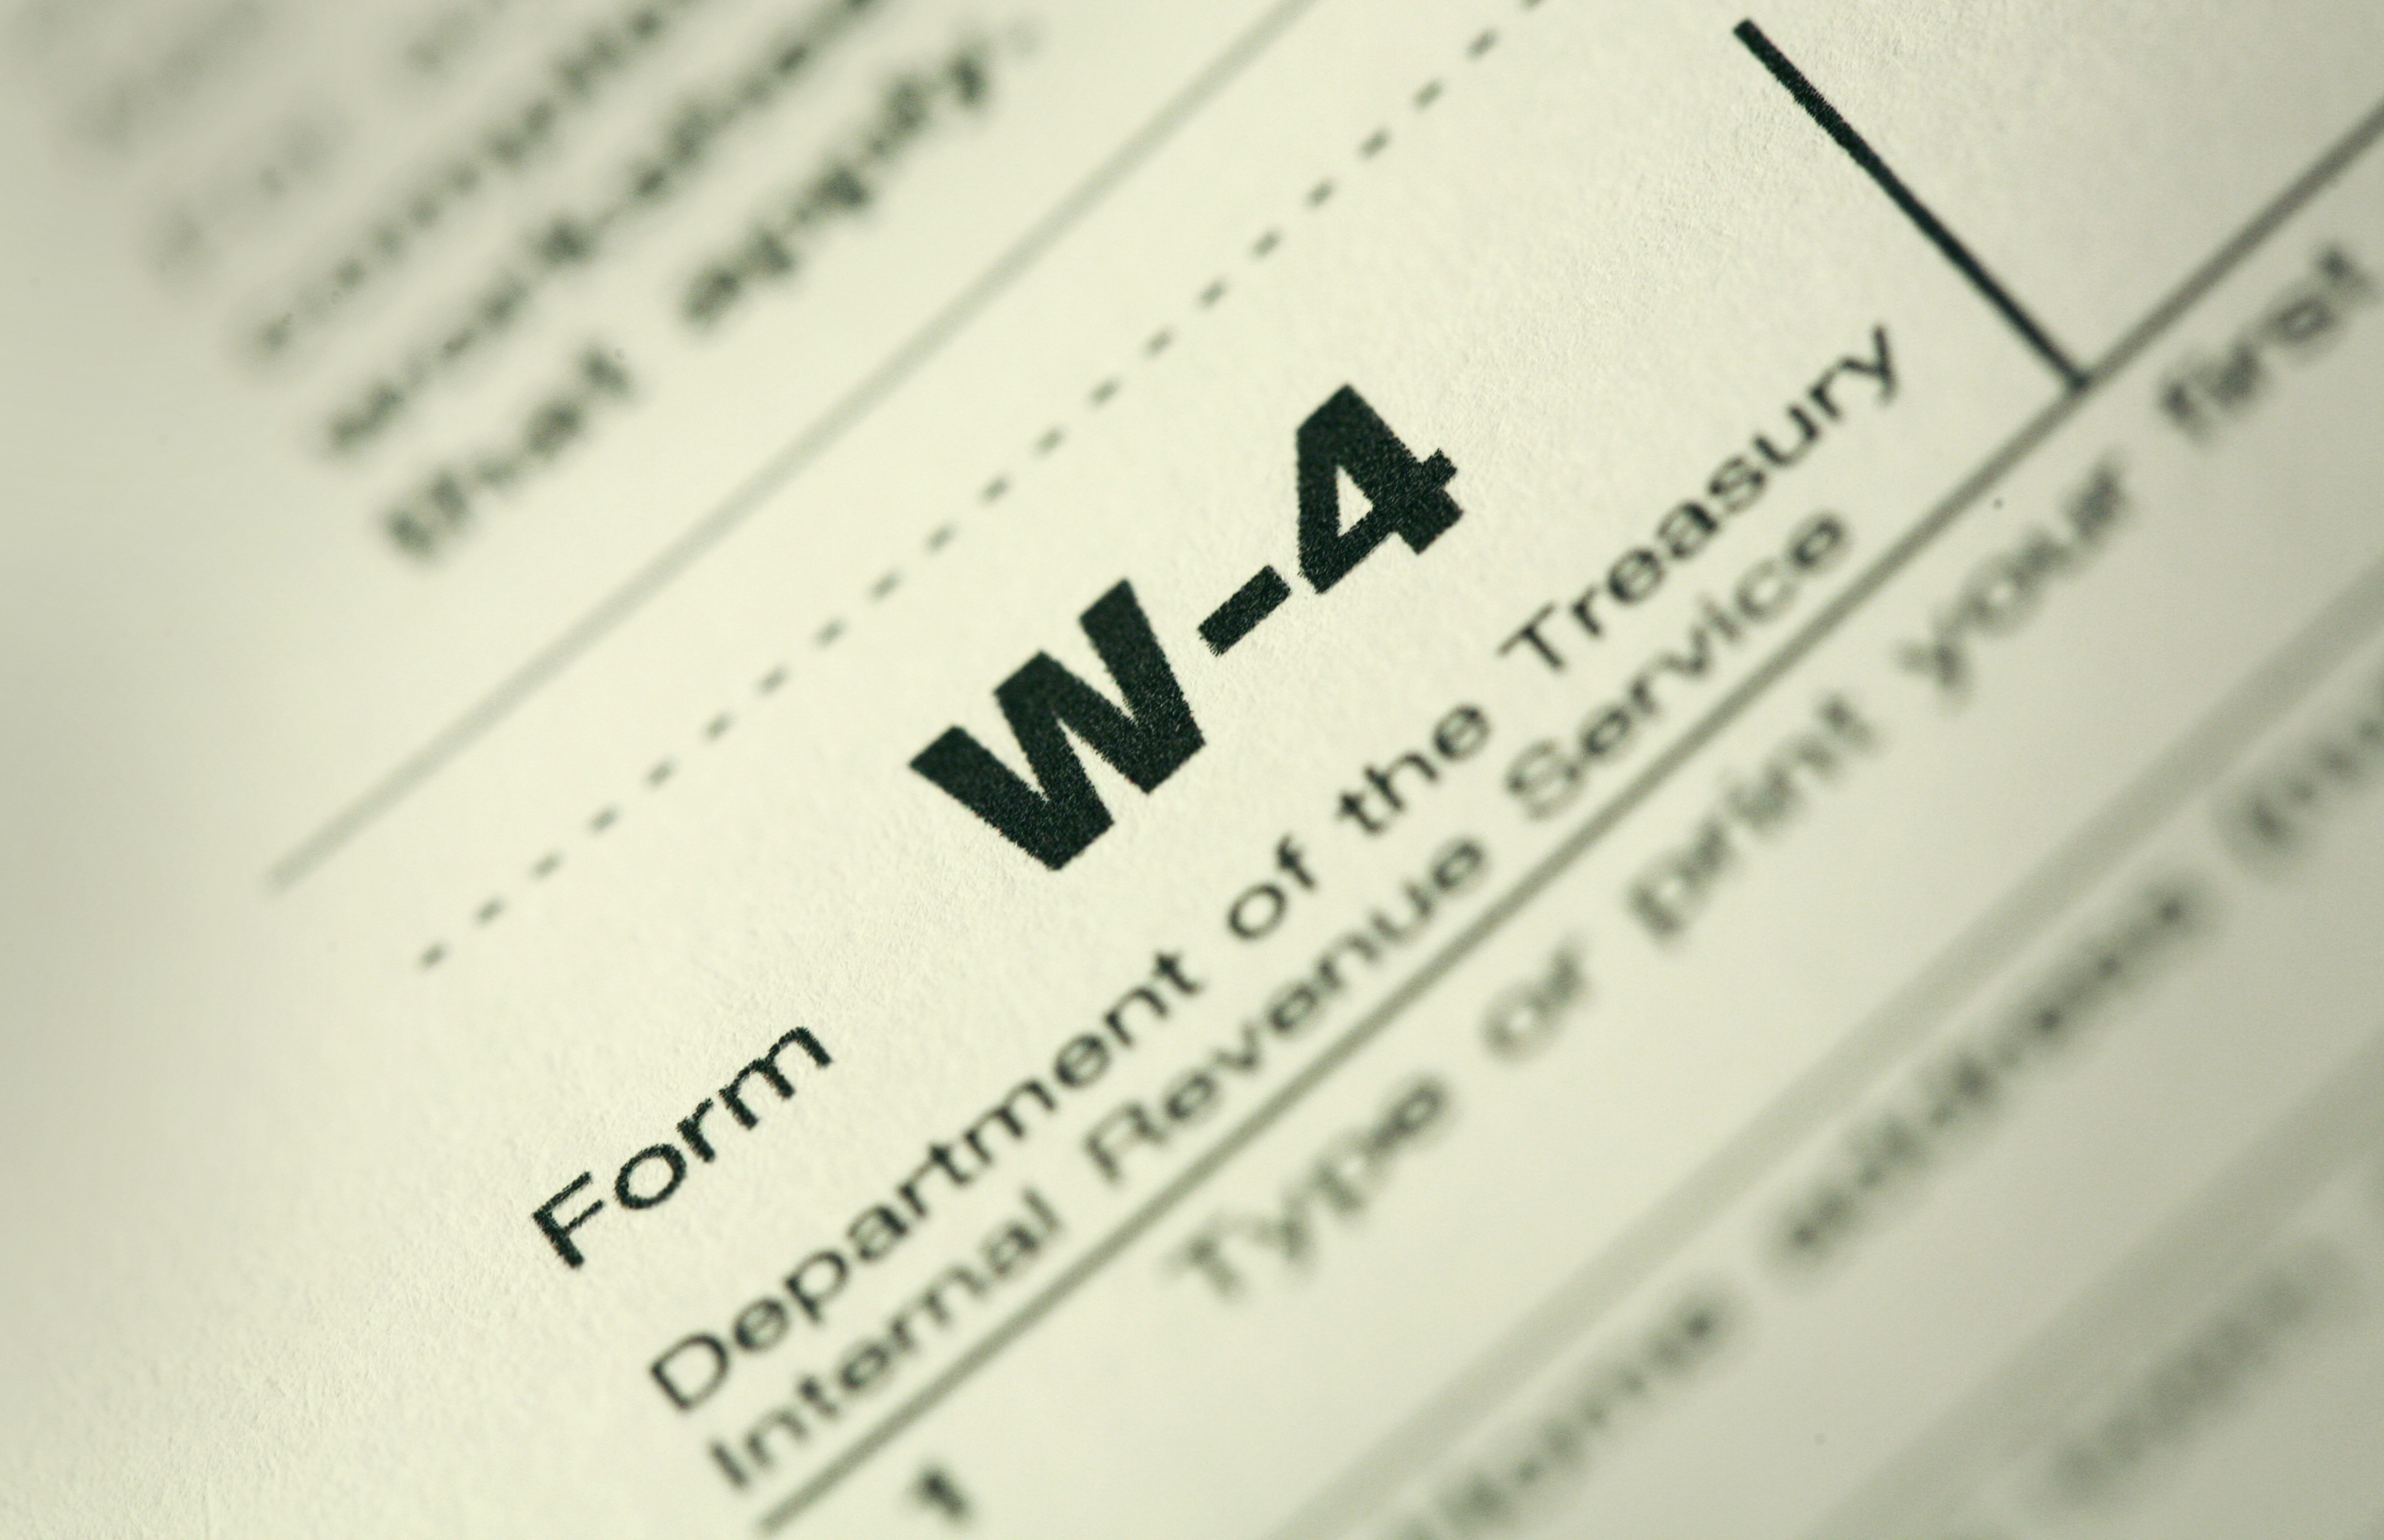 New 2020 W-4 tax form - What you need to know